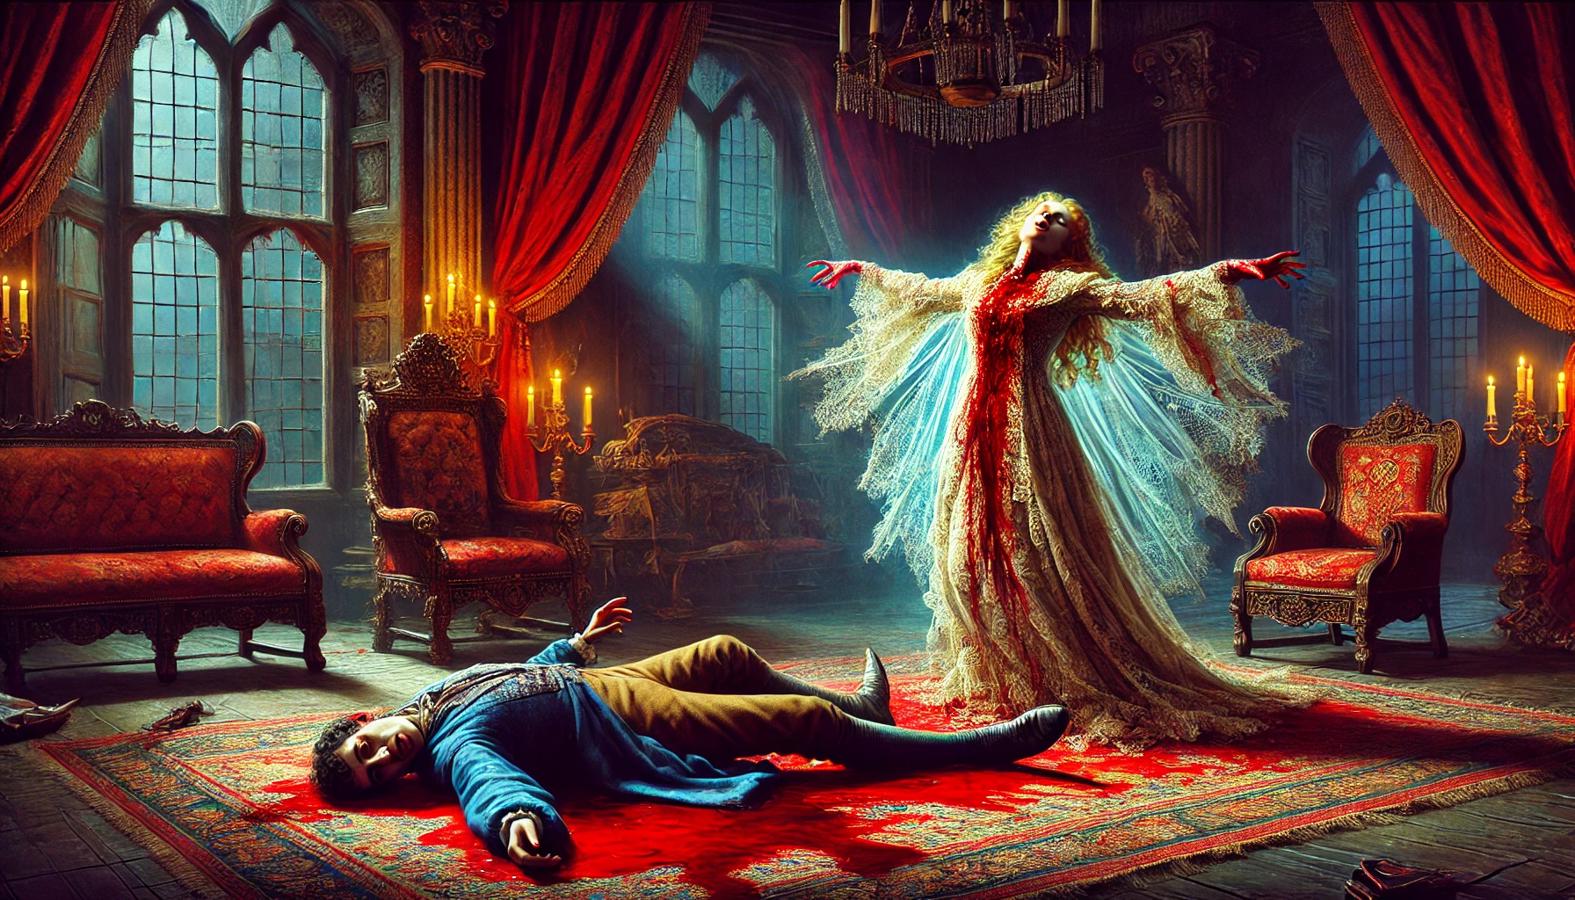 The Lady Madeline, blood-stained and emaciated, falls upon her brother in her final death agonies.